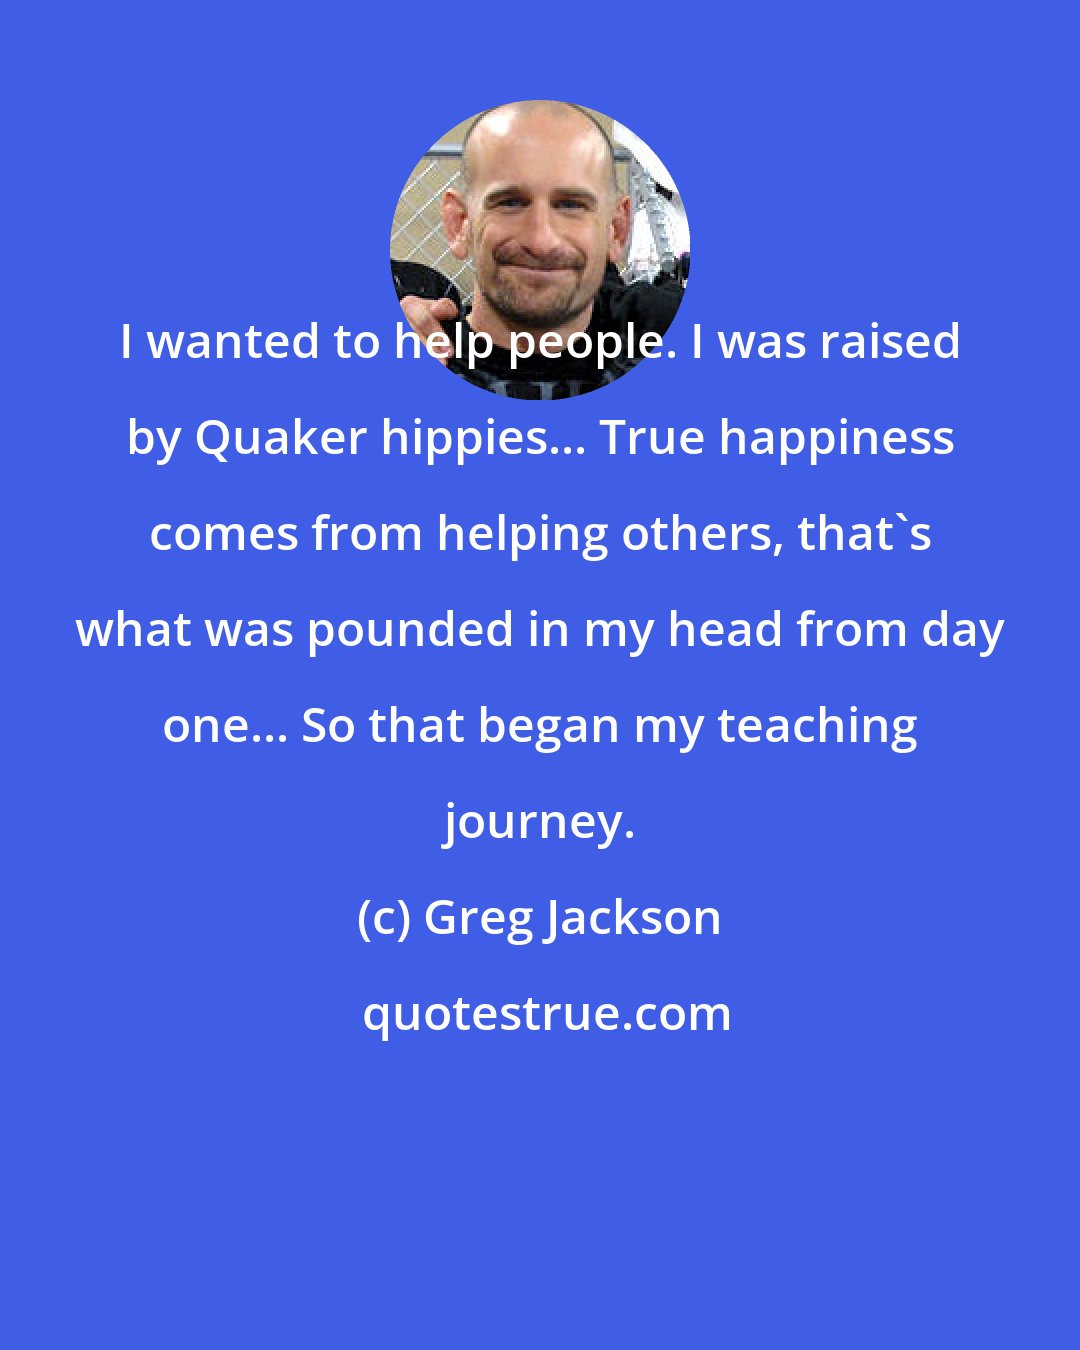 Greg Jackson: I wanted to help people. I was raised by Quaker hippies... True happiness comes from helping others, that's what was pounded in my head from day one... So that began my teaching journey.